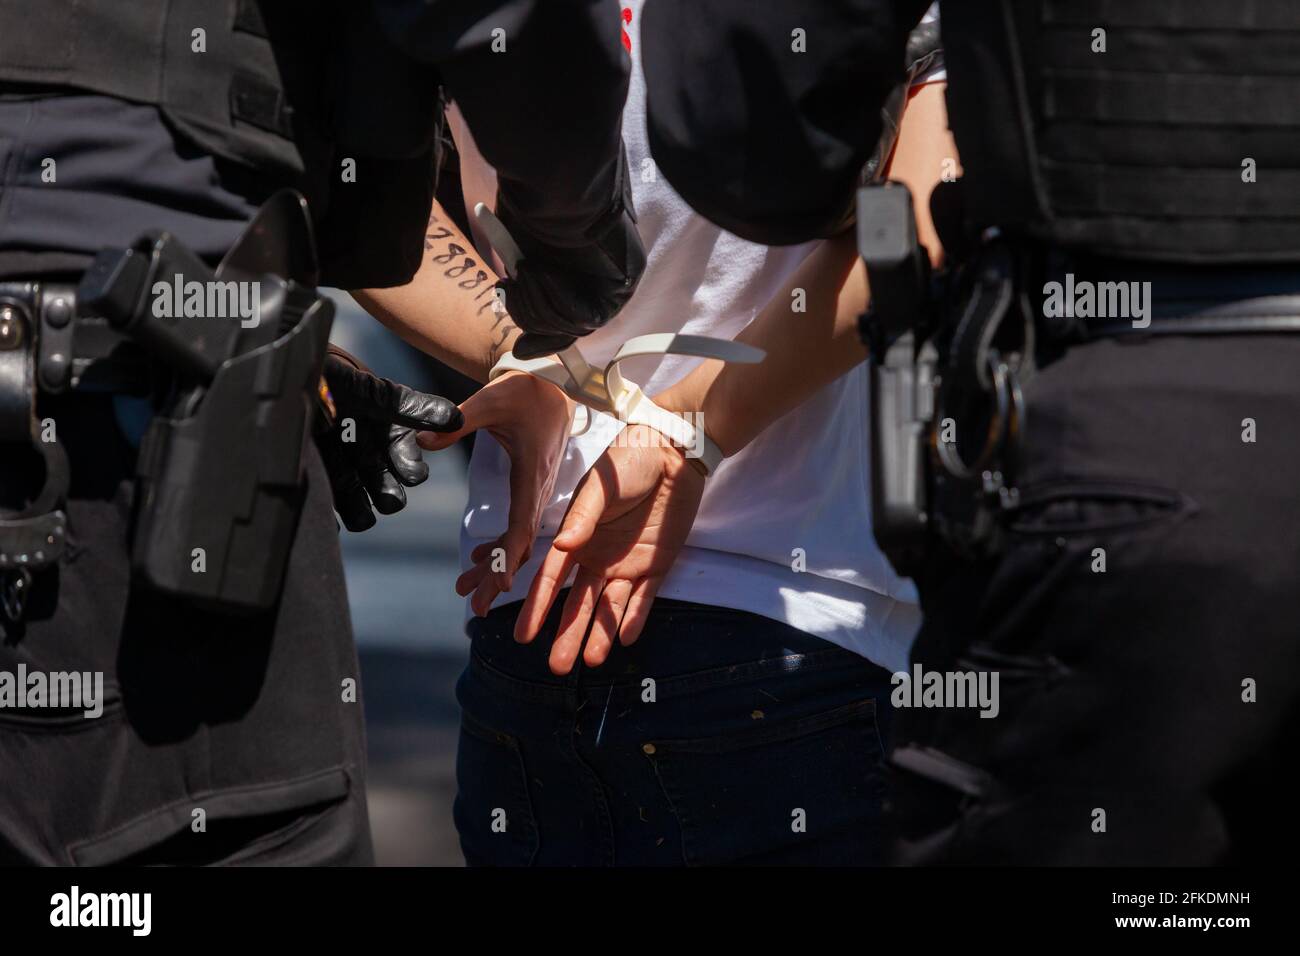 Washington, DC, United States.  Pictured: Activists are arrested by US Secret Service officers for blocking an entrance to the White House in a civil disobedience action.  Immigrants and supporters from Cosecha chapters around the country protest the lack of action on immigration on the 100th day of Biden’s administration.  Credit: Allison C Bailey / Alamy Live News Stock Photo